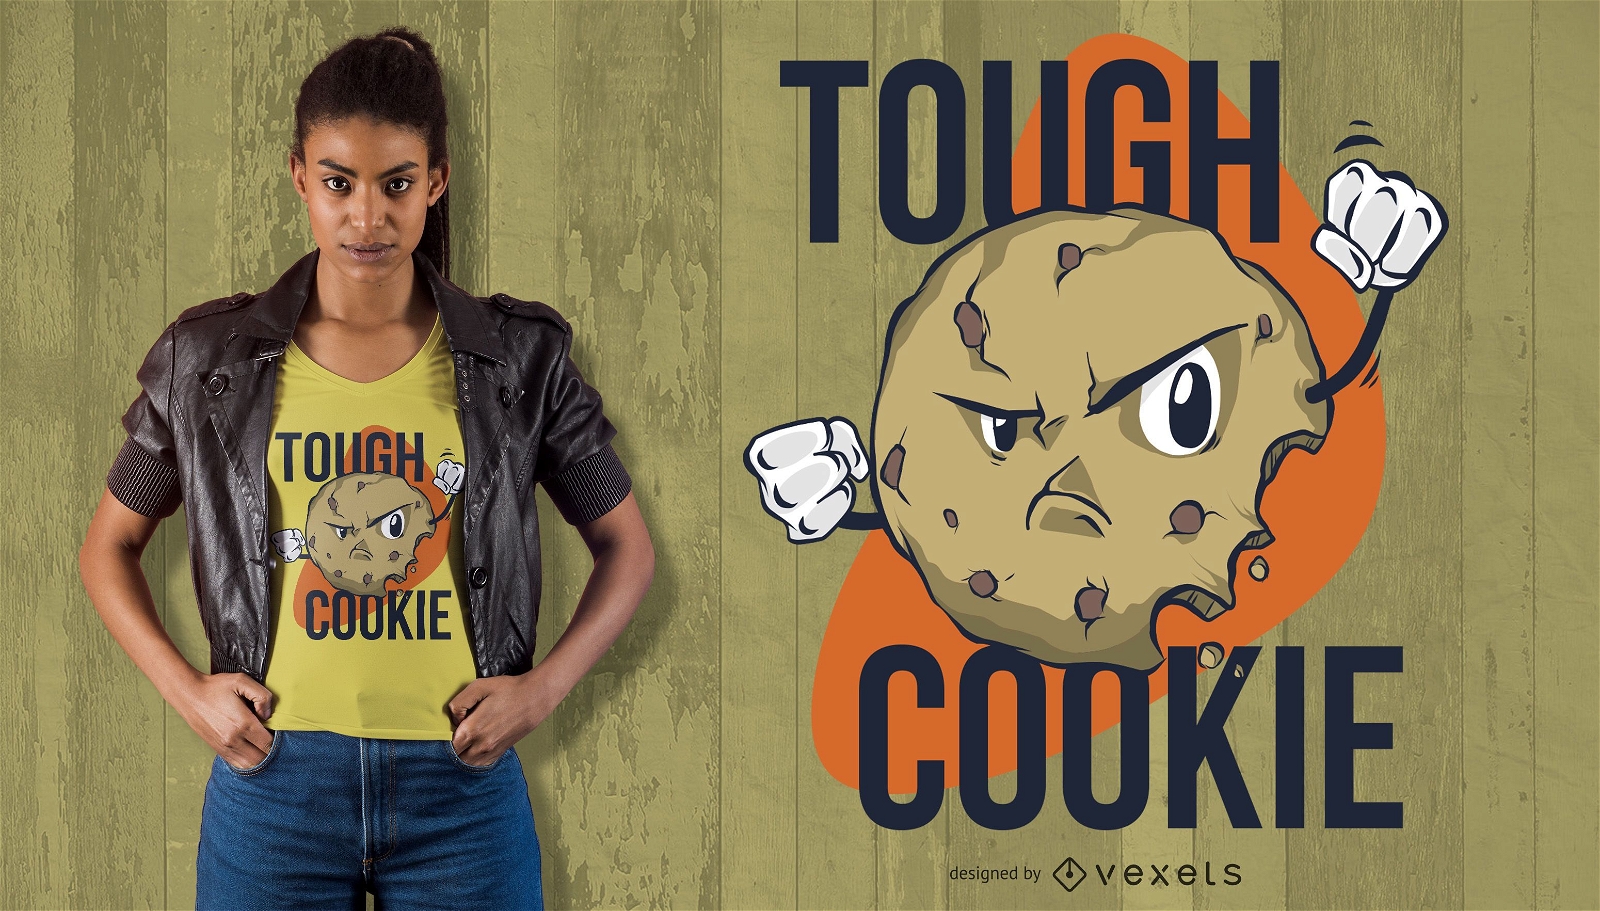 Though Cookie T-shirt Design